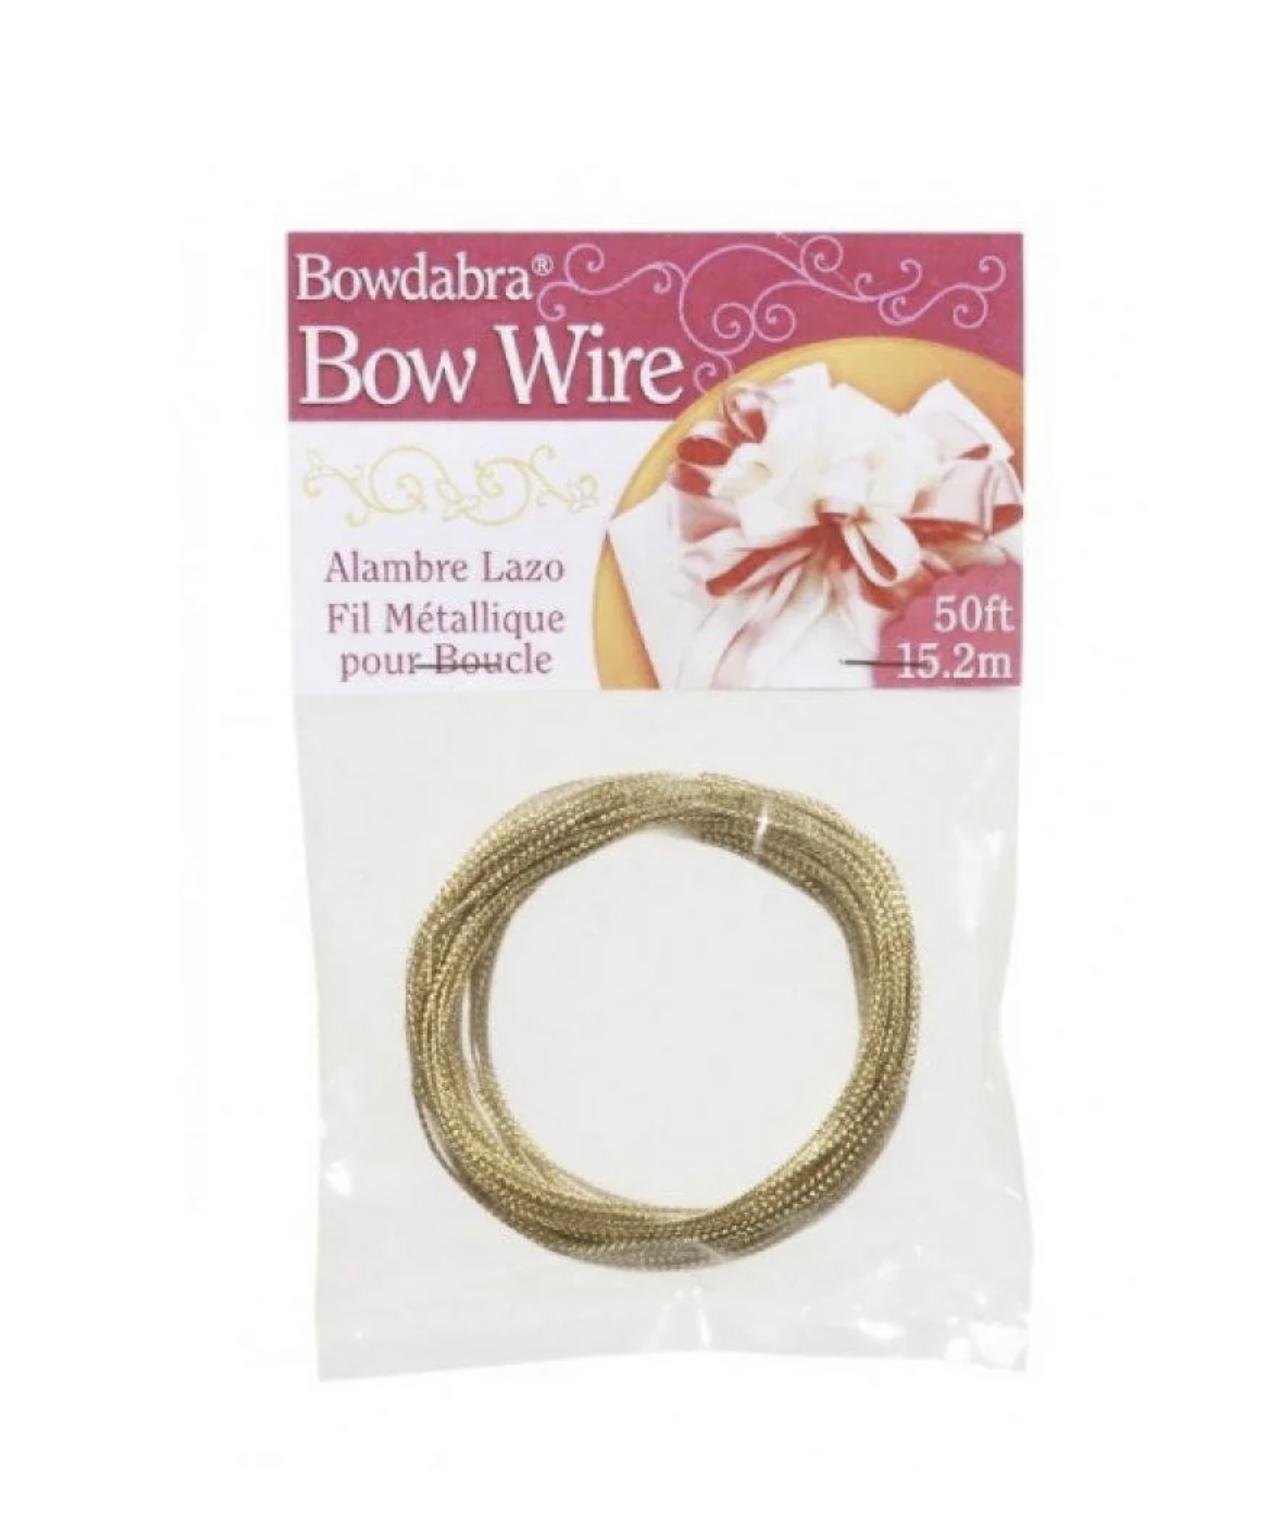 Bowdabra Bow Maker Wire (50 Feet) - GOLD (BOW3030)